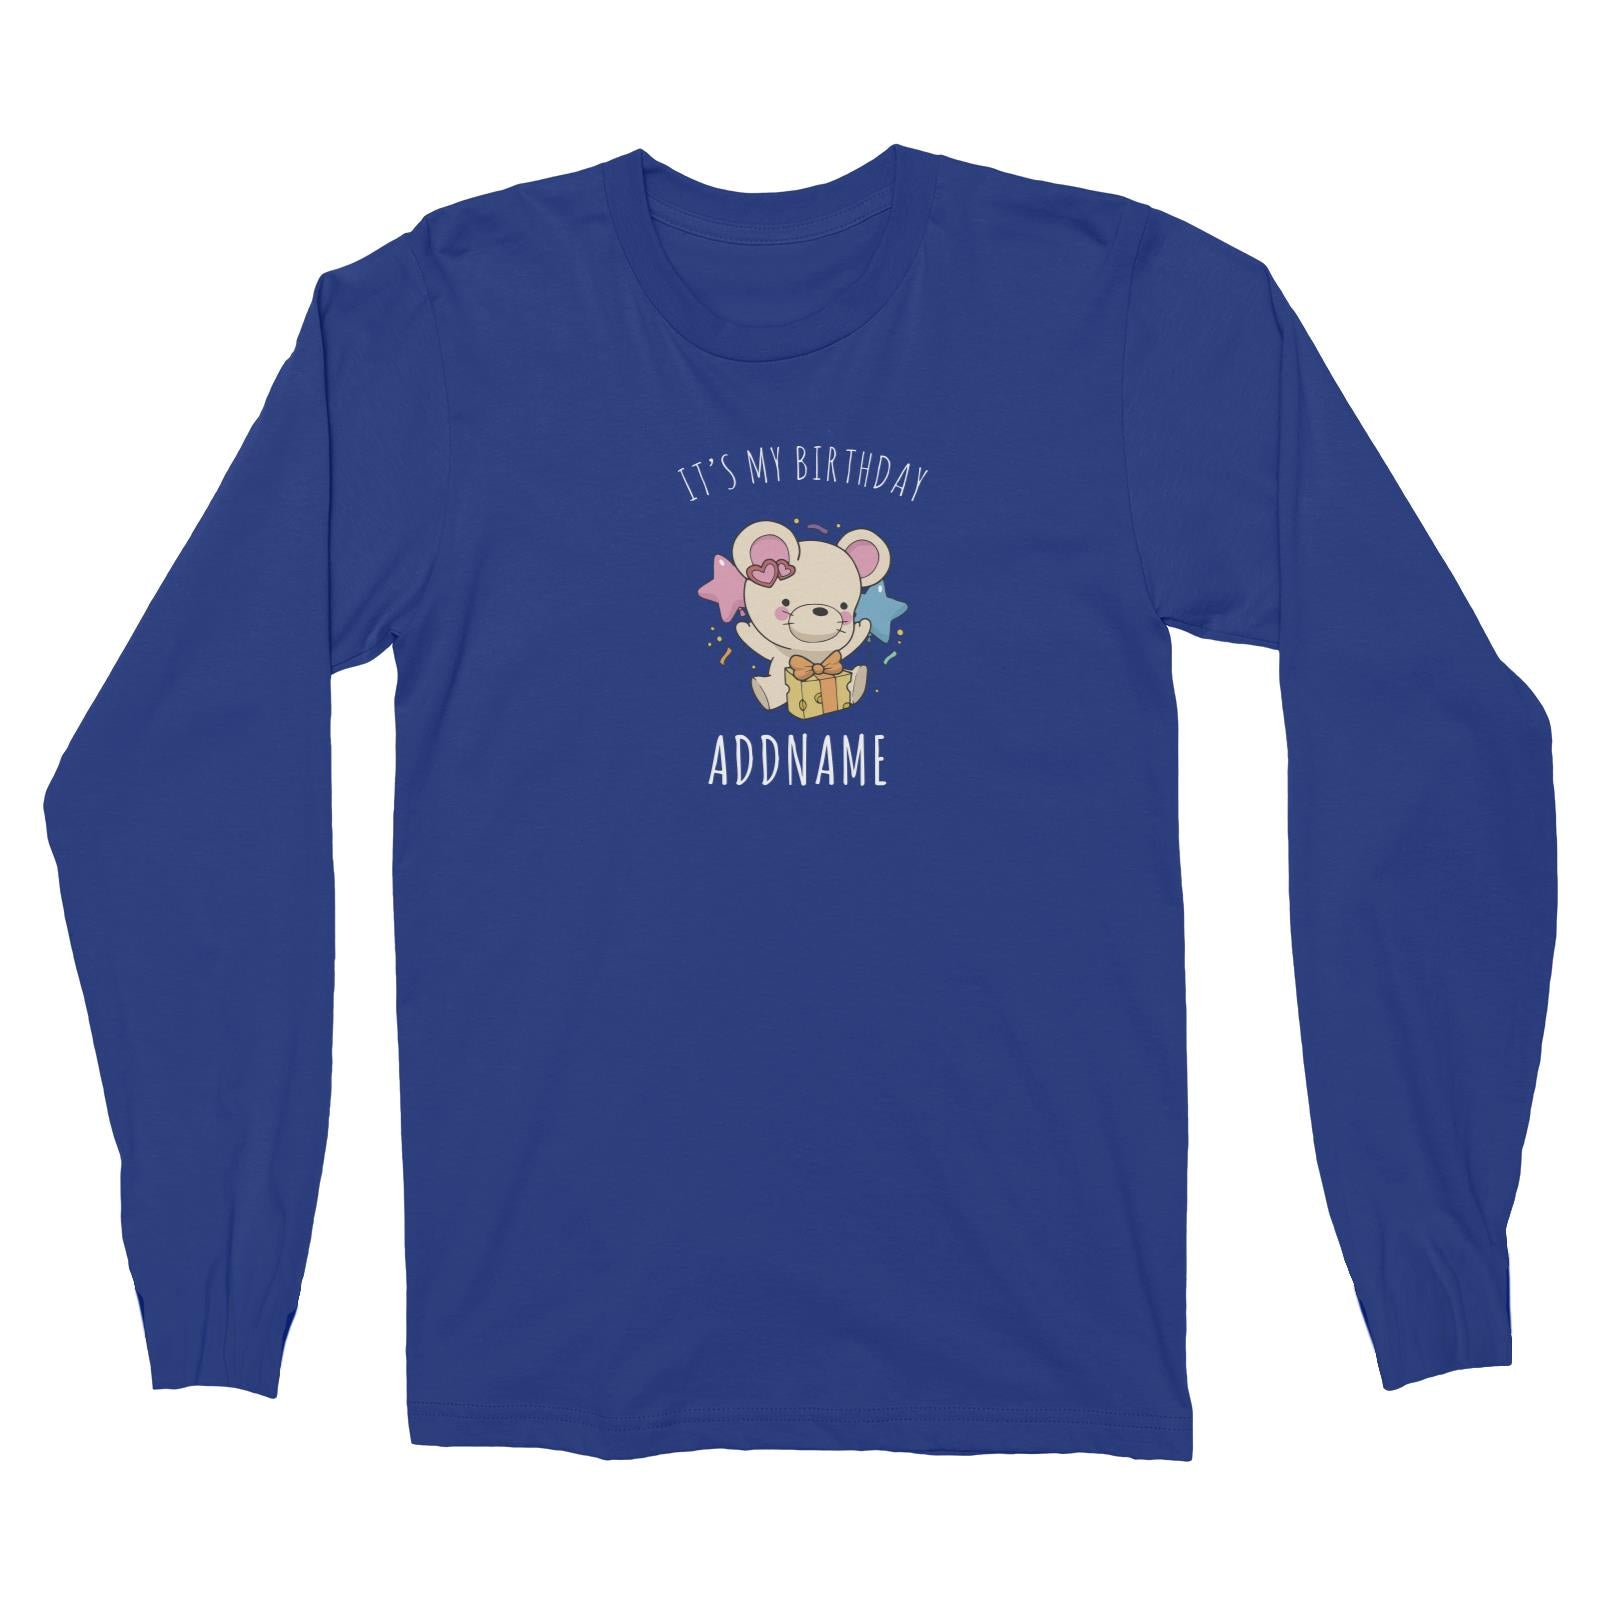 Birthday Sketch Animals Mouse with Cheese Present It's My Birthday Addname Long Sleeve Unisex T-Shirt